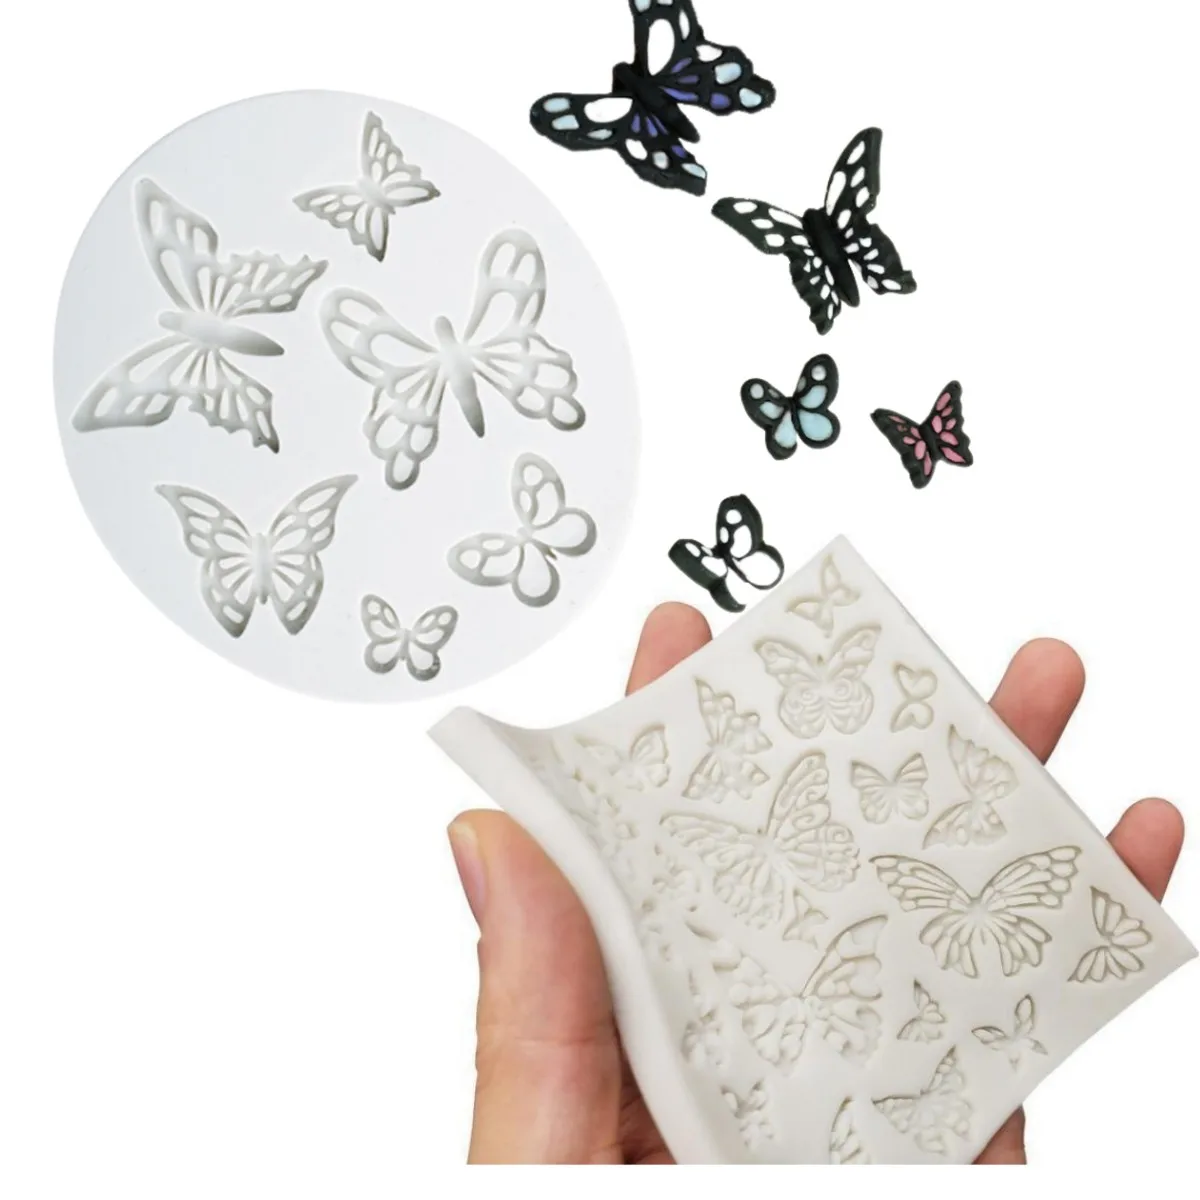 

3D Cute Butterfly Silicone Molds DIY Fondant Cookie Cupcake Topper Chocolate Kitchen Cake Decor Baking Tools Plaster Resin Mould